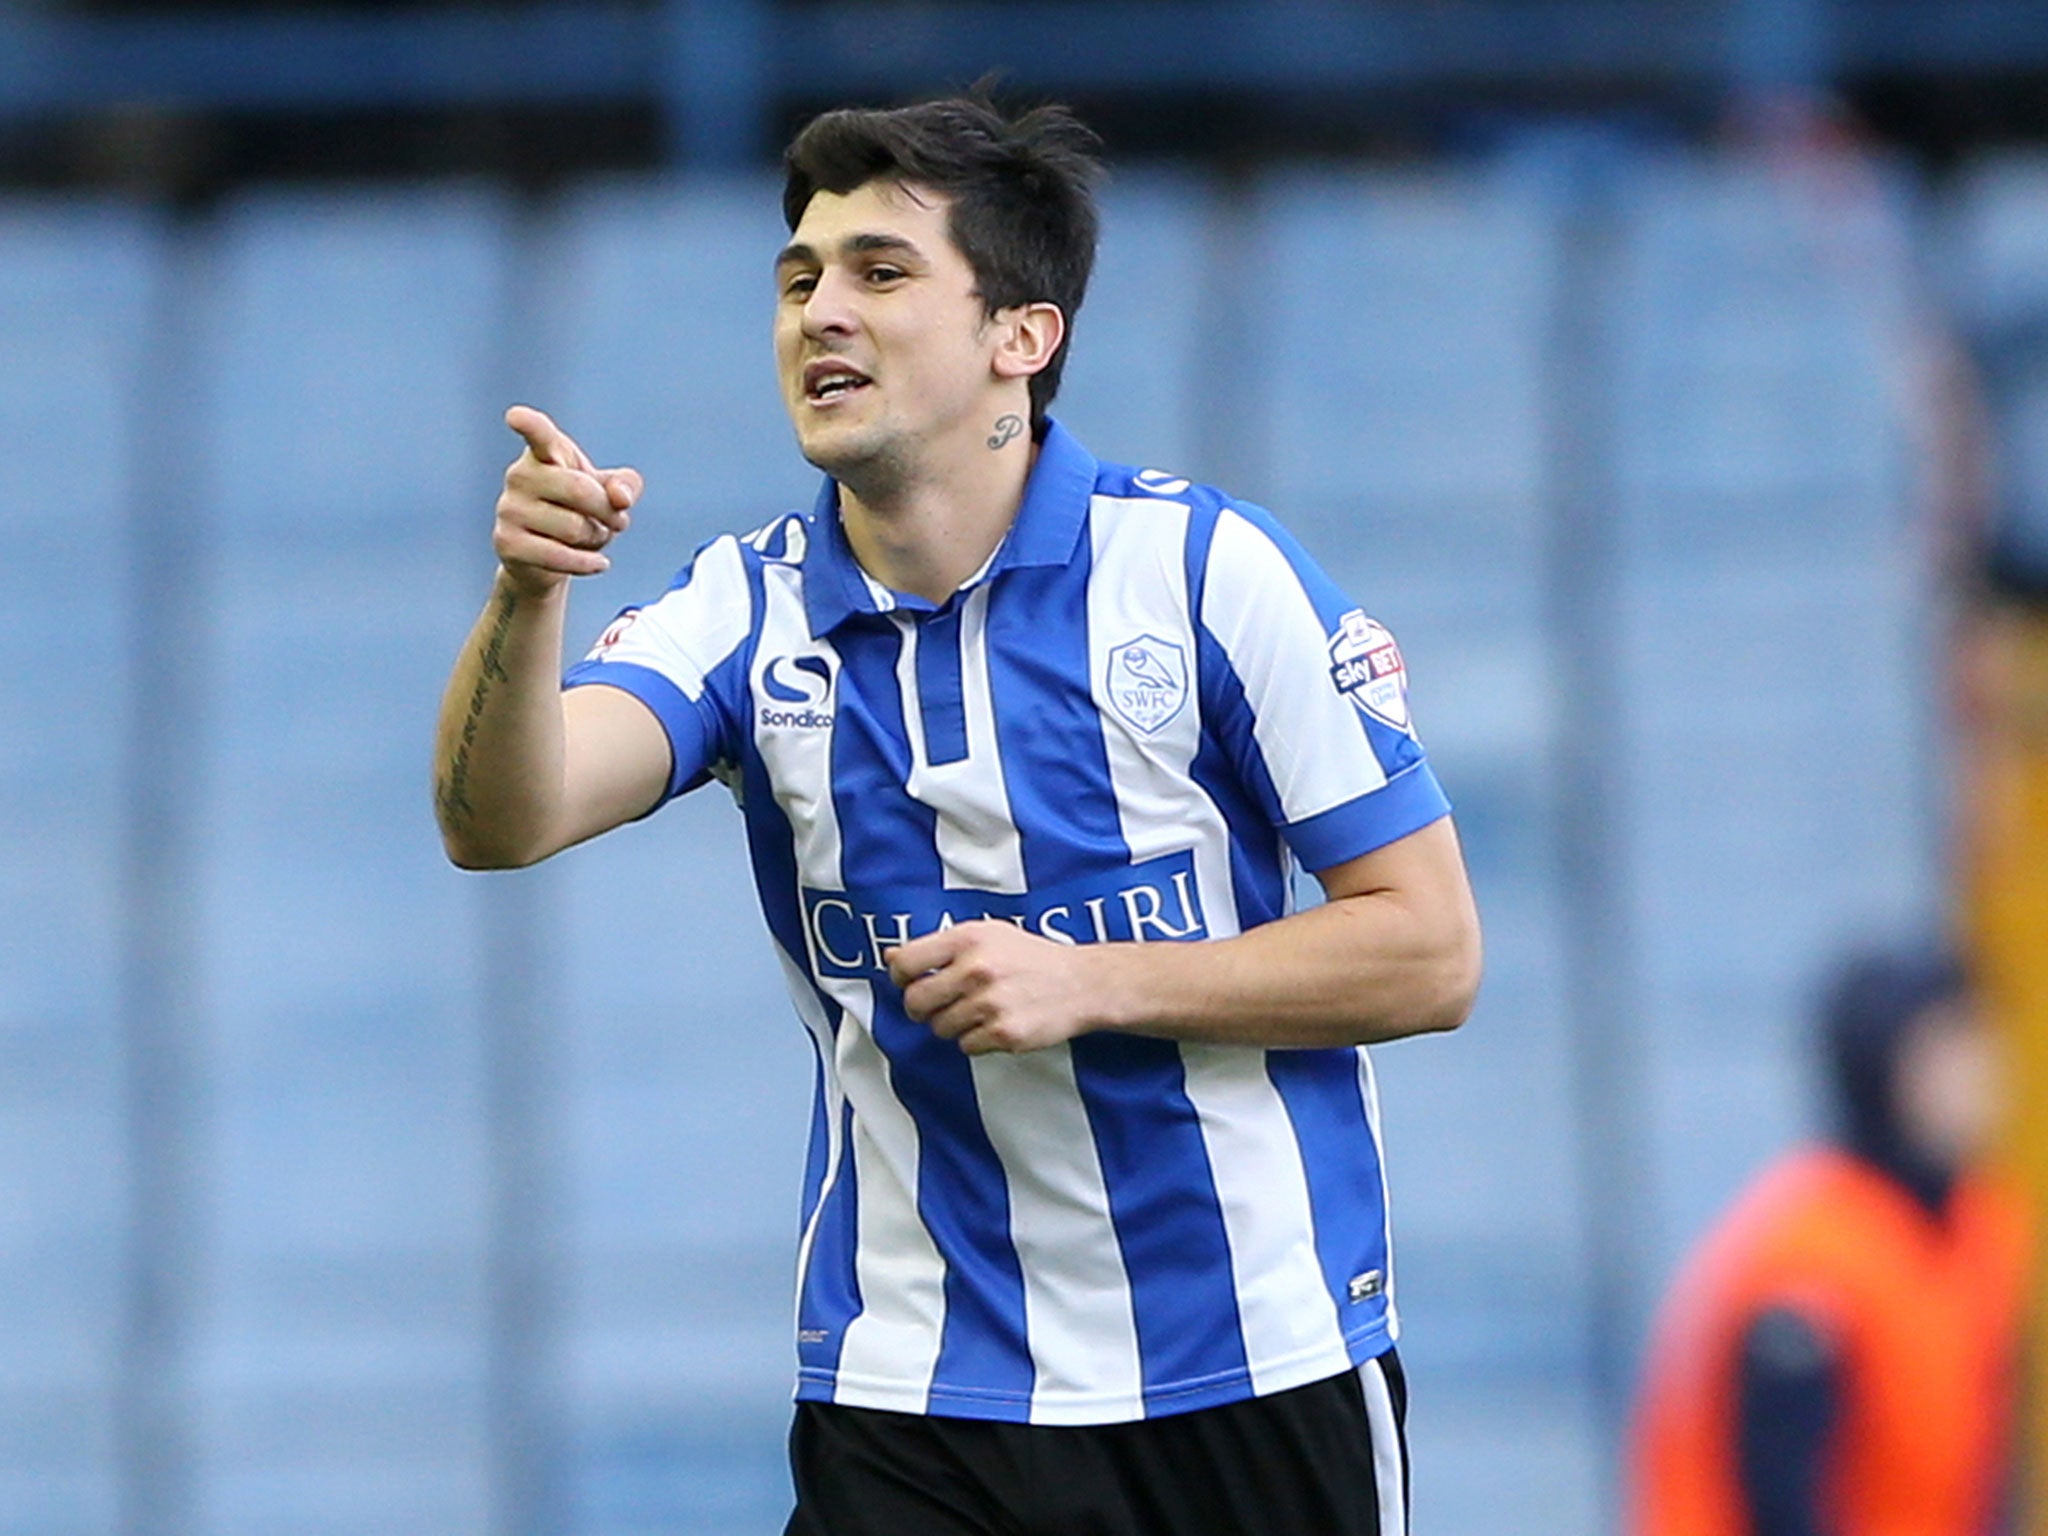 Fernando Forestieri celebrates getting Sheffield Wednesday’s equaliser, the first of his two goals in a 4-1 win